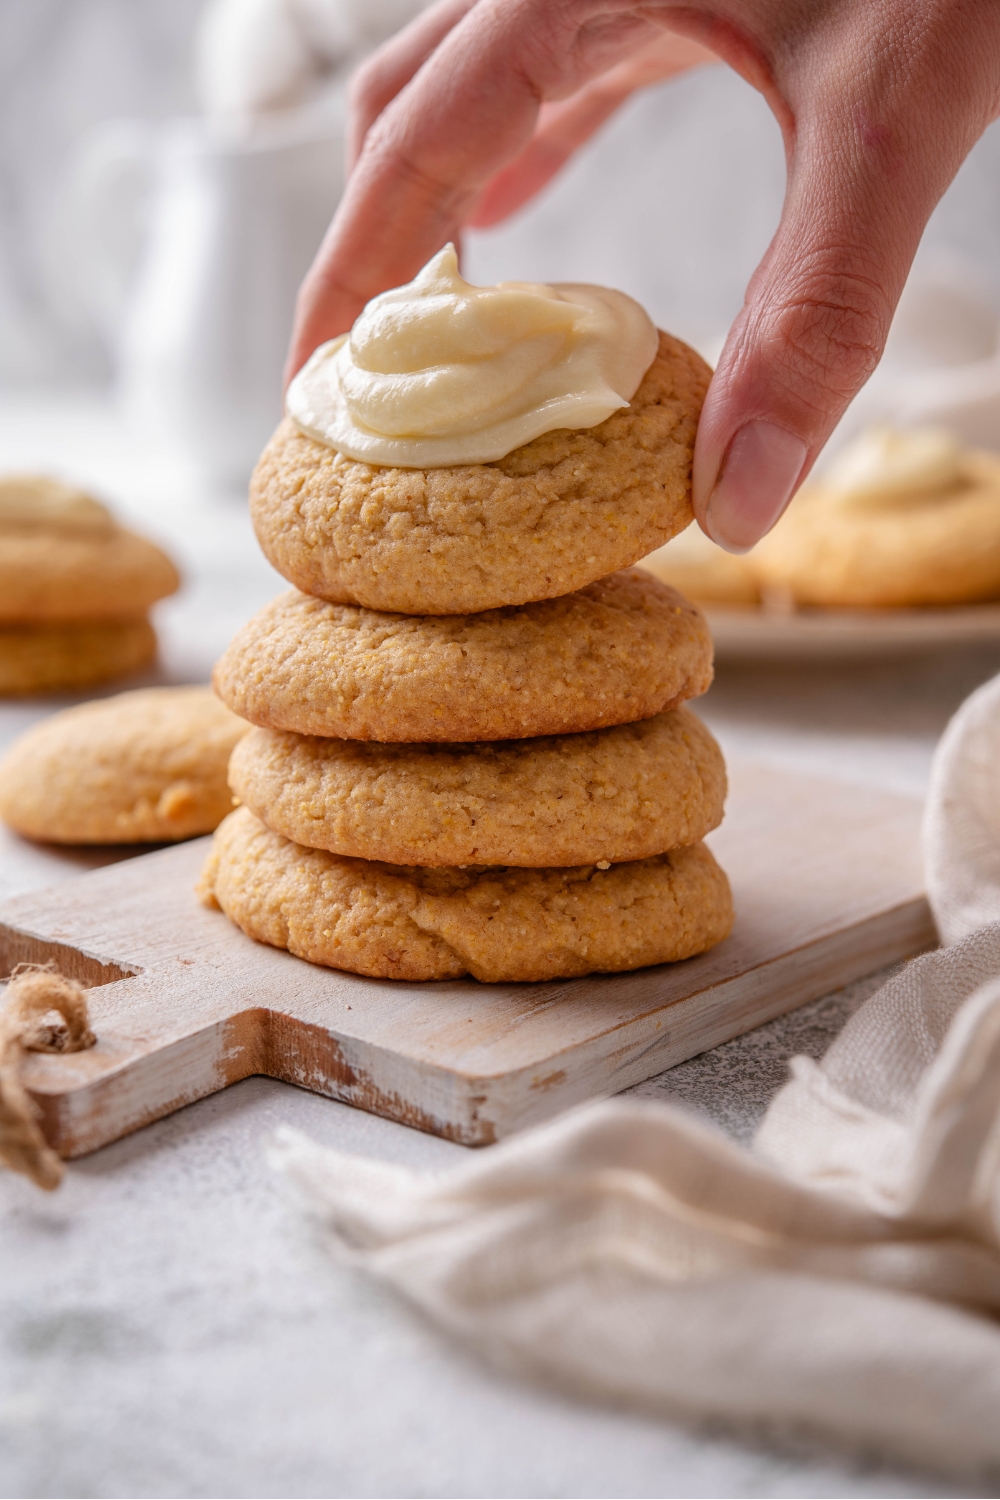 A hand grabbing a cornbread cookie from a stack of four cookies on a wooden board. The top cookie has a dollop of buttercream frosting.